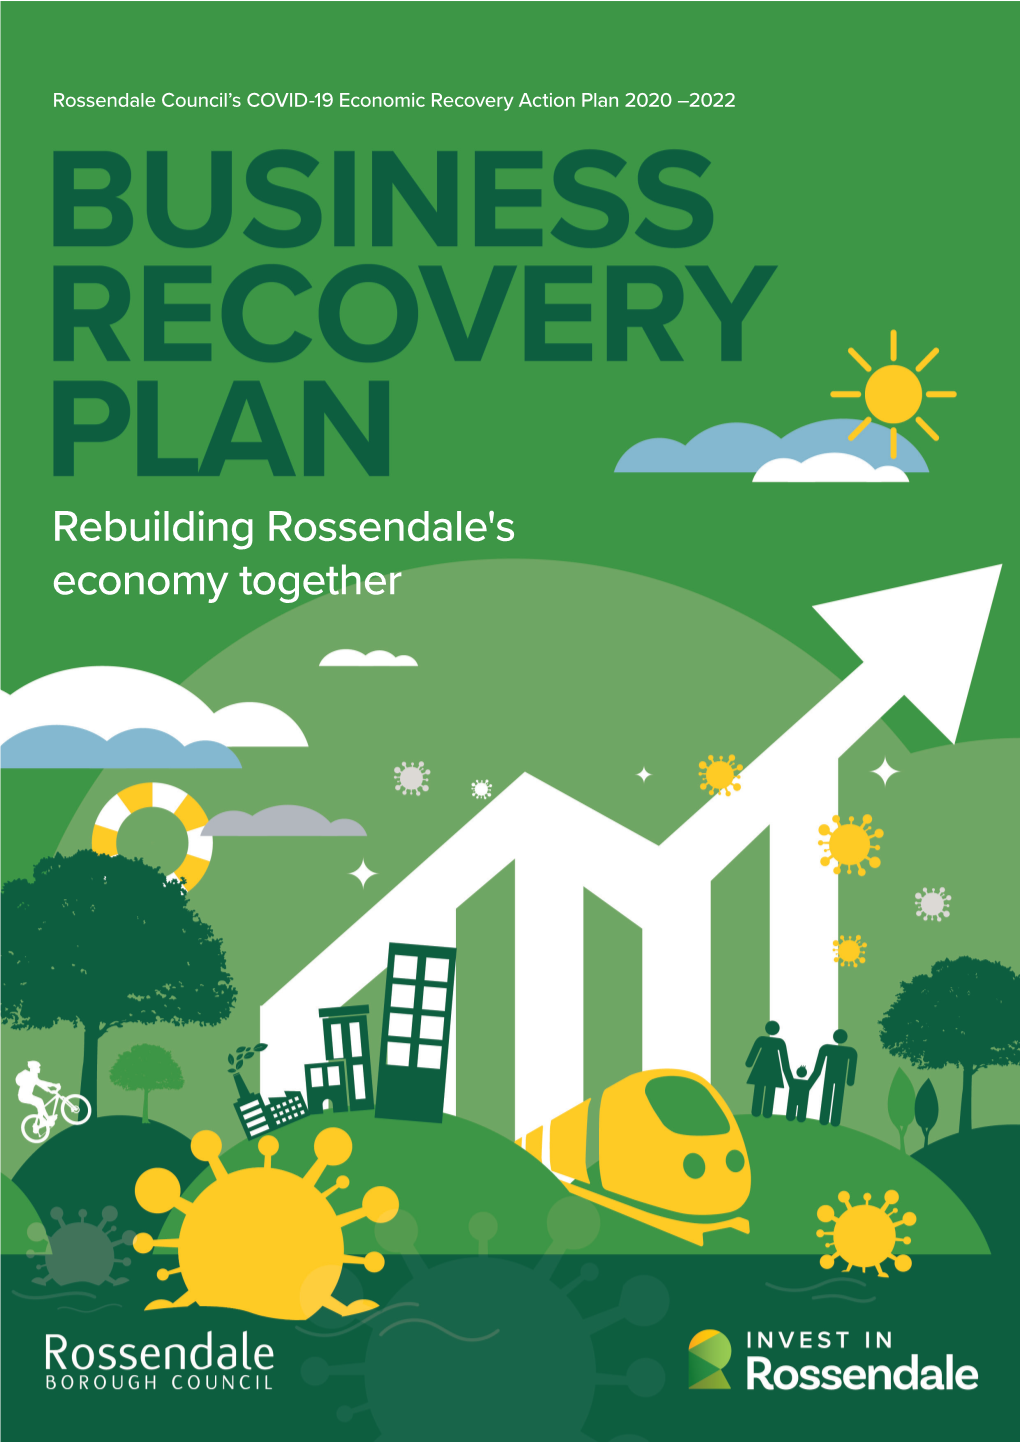 Business Recovery Plan 2020 - 2022